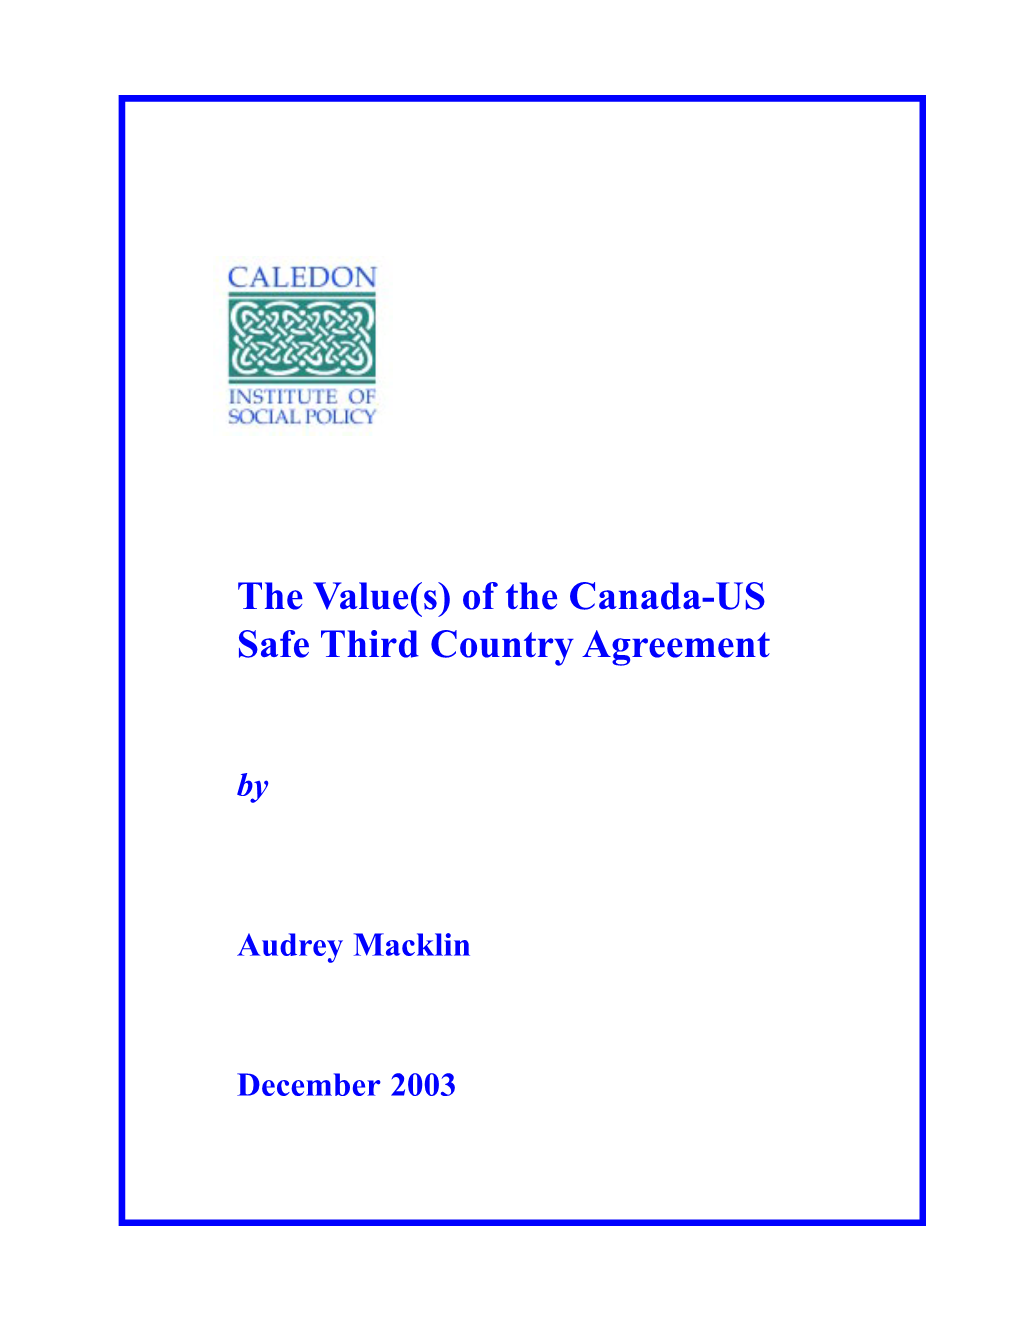 The Value(S) of the Canada-US Safe Third Country Agreement